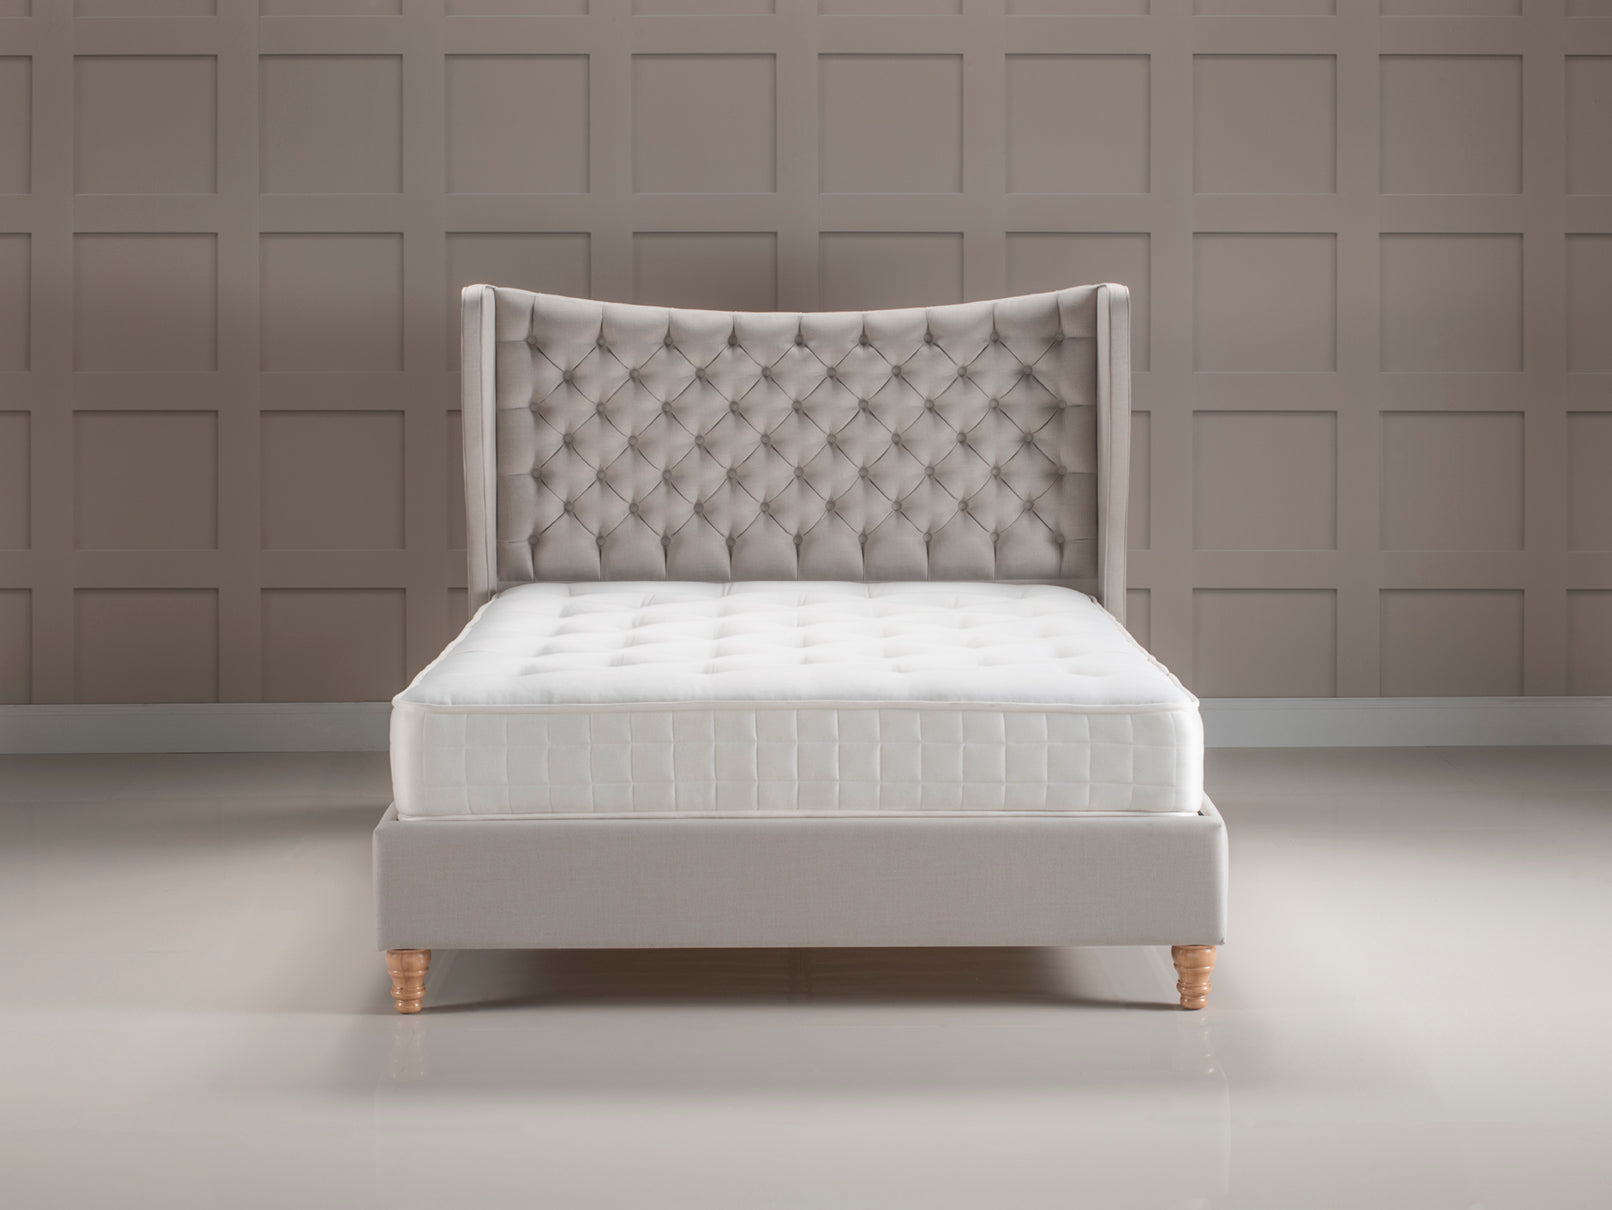 The Ashdown Upholstered Bed